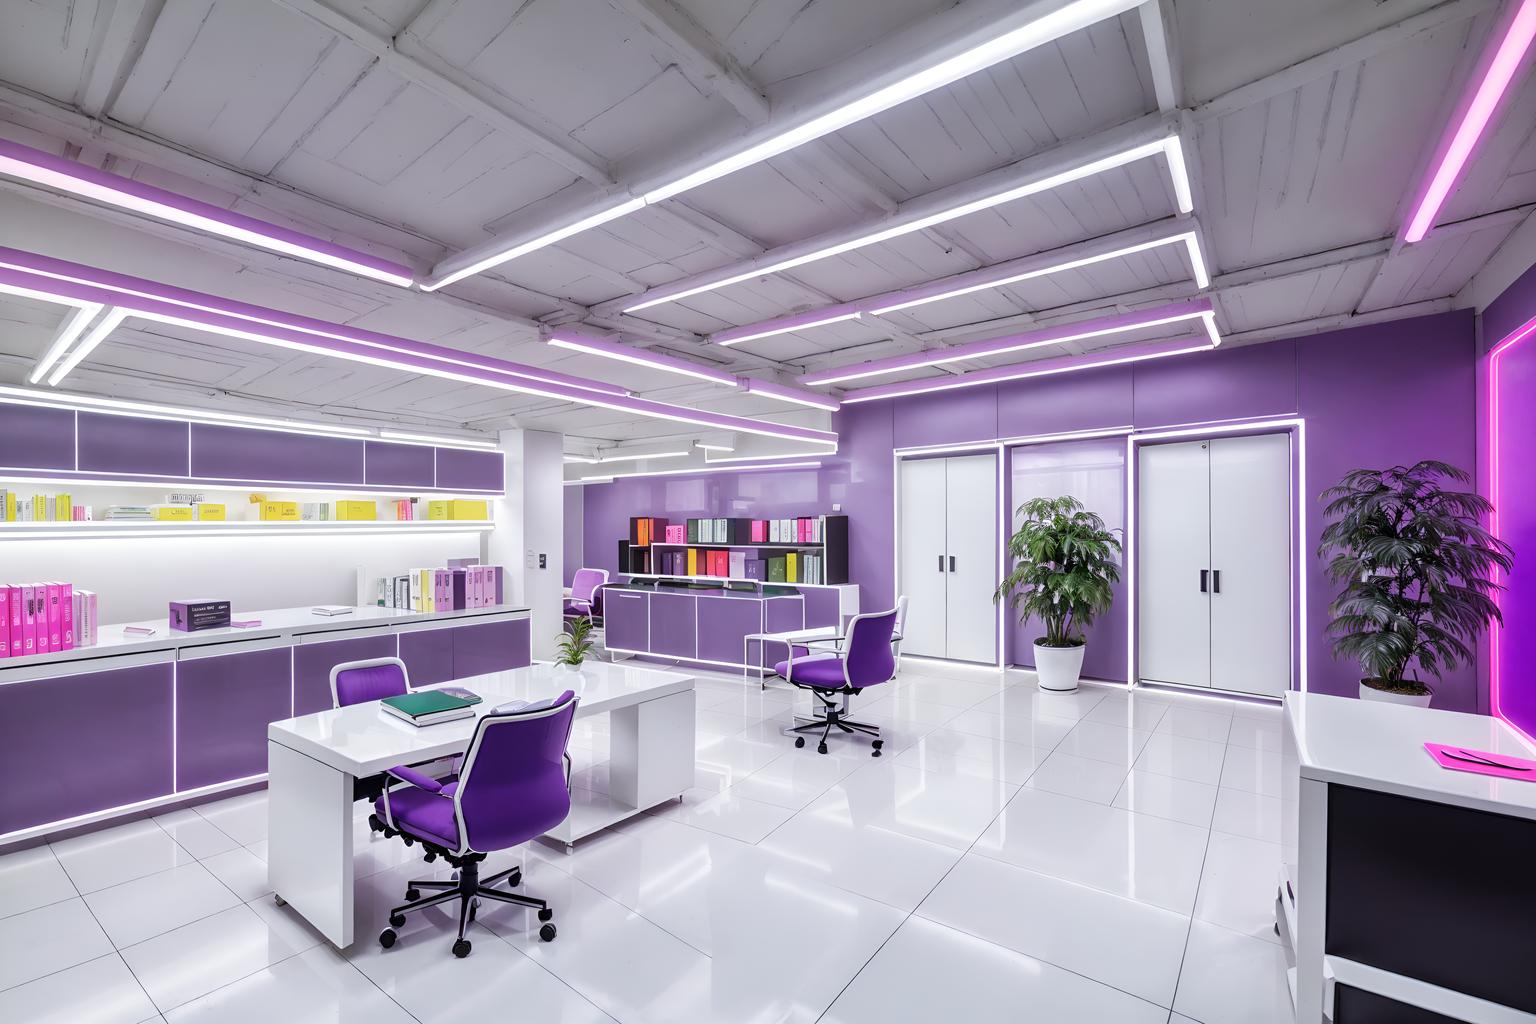 vaporwave-style (study room interior) with office chair and lounge chair and cabinets and desk lamp and plant and writing desk and bookshelves and office chair. . with 1980s retail shops and neon glow and white square bathroom tiles and neon glow and white square bathroom tiles and purple lights and white roman statues, white roman sculptures, white roman columns, white roman pillars in the center of the room, and purple lights. . cinematic photo, highly detailed, cinematic lighting, ultra-detailed, ultrarealistic, photorealism, 8k. vaporwave interior design style. masterpiece, cinematic light, ultrarealistic+, photorealistic+, 8k, raw photo, realistic, sharp focus on eyes, (symmetrical eyes), (intact eyes), hyperrealistic, highest quality, best quality, , highly detailed, masterpiece, best quality, extremely detailed 8k wallpaper, masterpiece, best quality, ultra-detailed, best shadow, detailed background, detailed face, detailed eyes, high contrast, best illumination, detailed face, dulux, caustic, dynamic angle, detailed glow. dramatic lighting. highly detailed, insanely detailed hair, symmetrical, intricate details, professionally retouched, 8k high definition. strong bokeh. award winning photo.